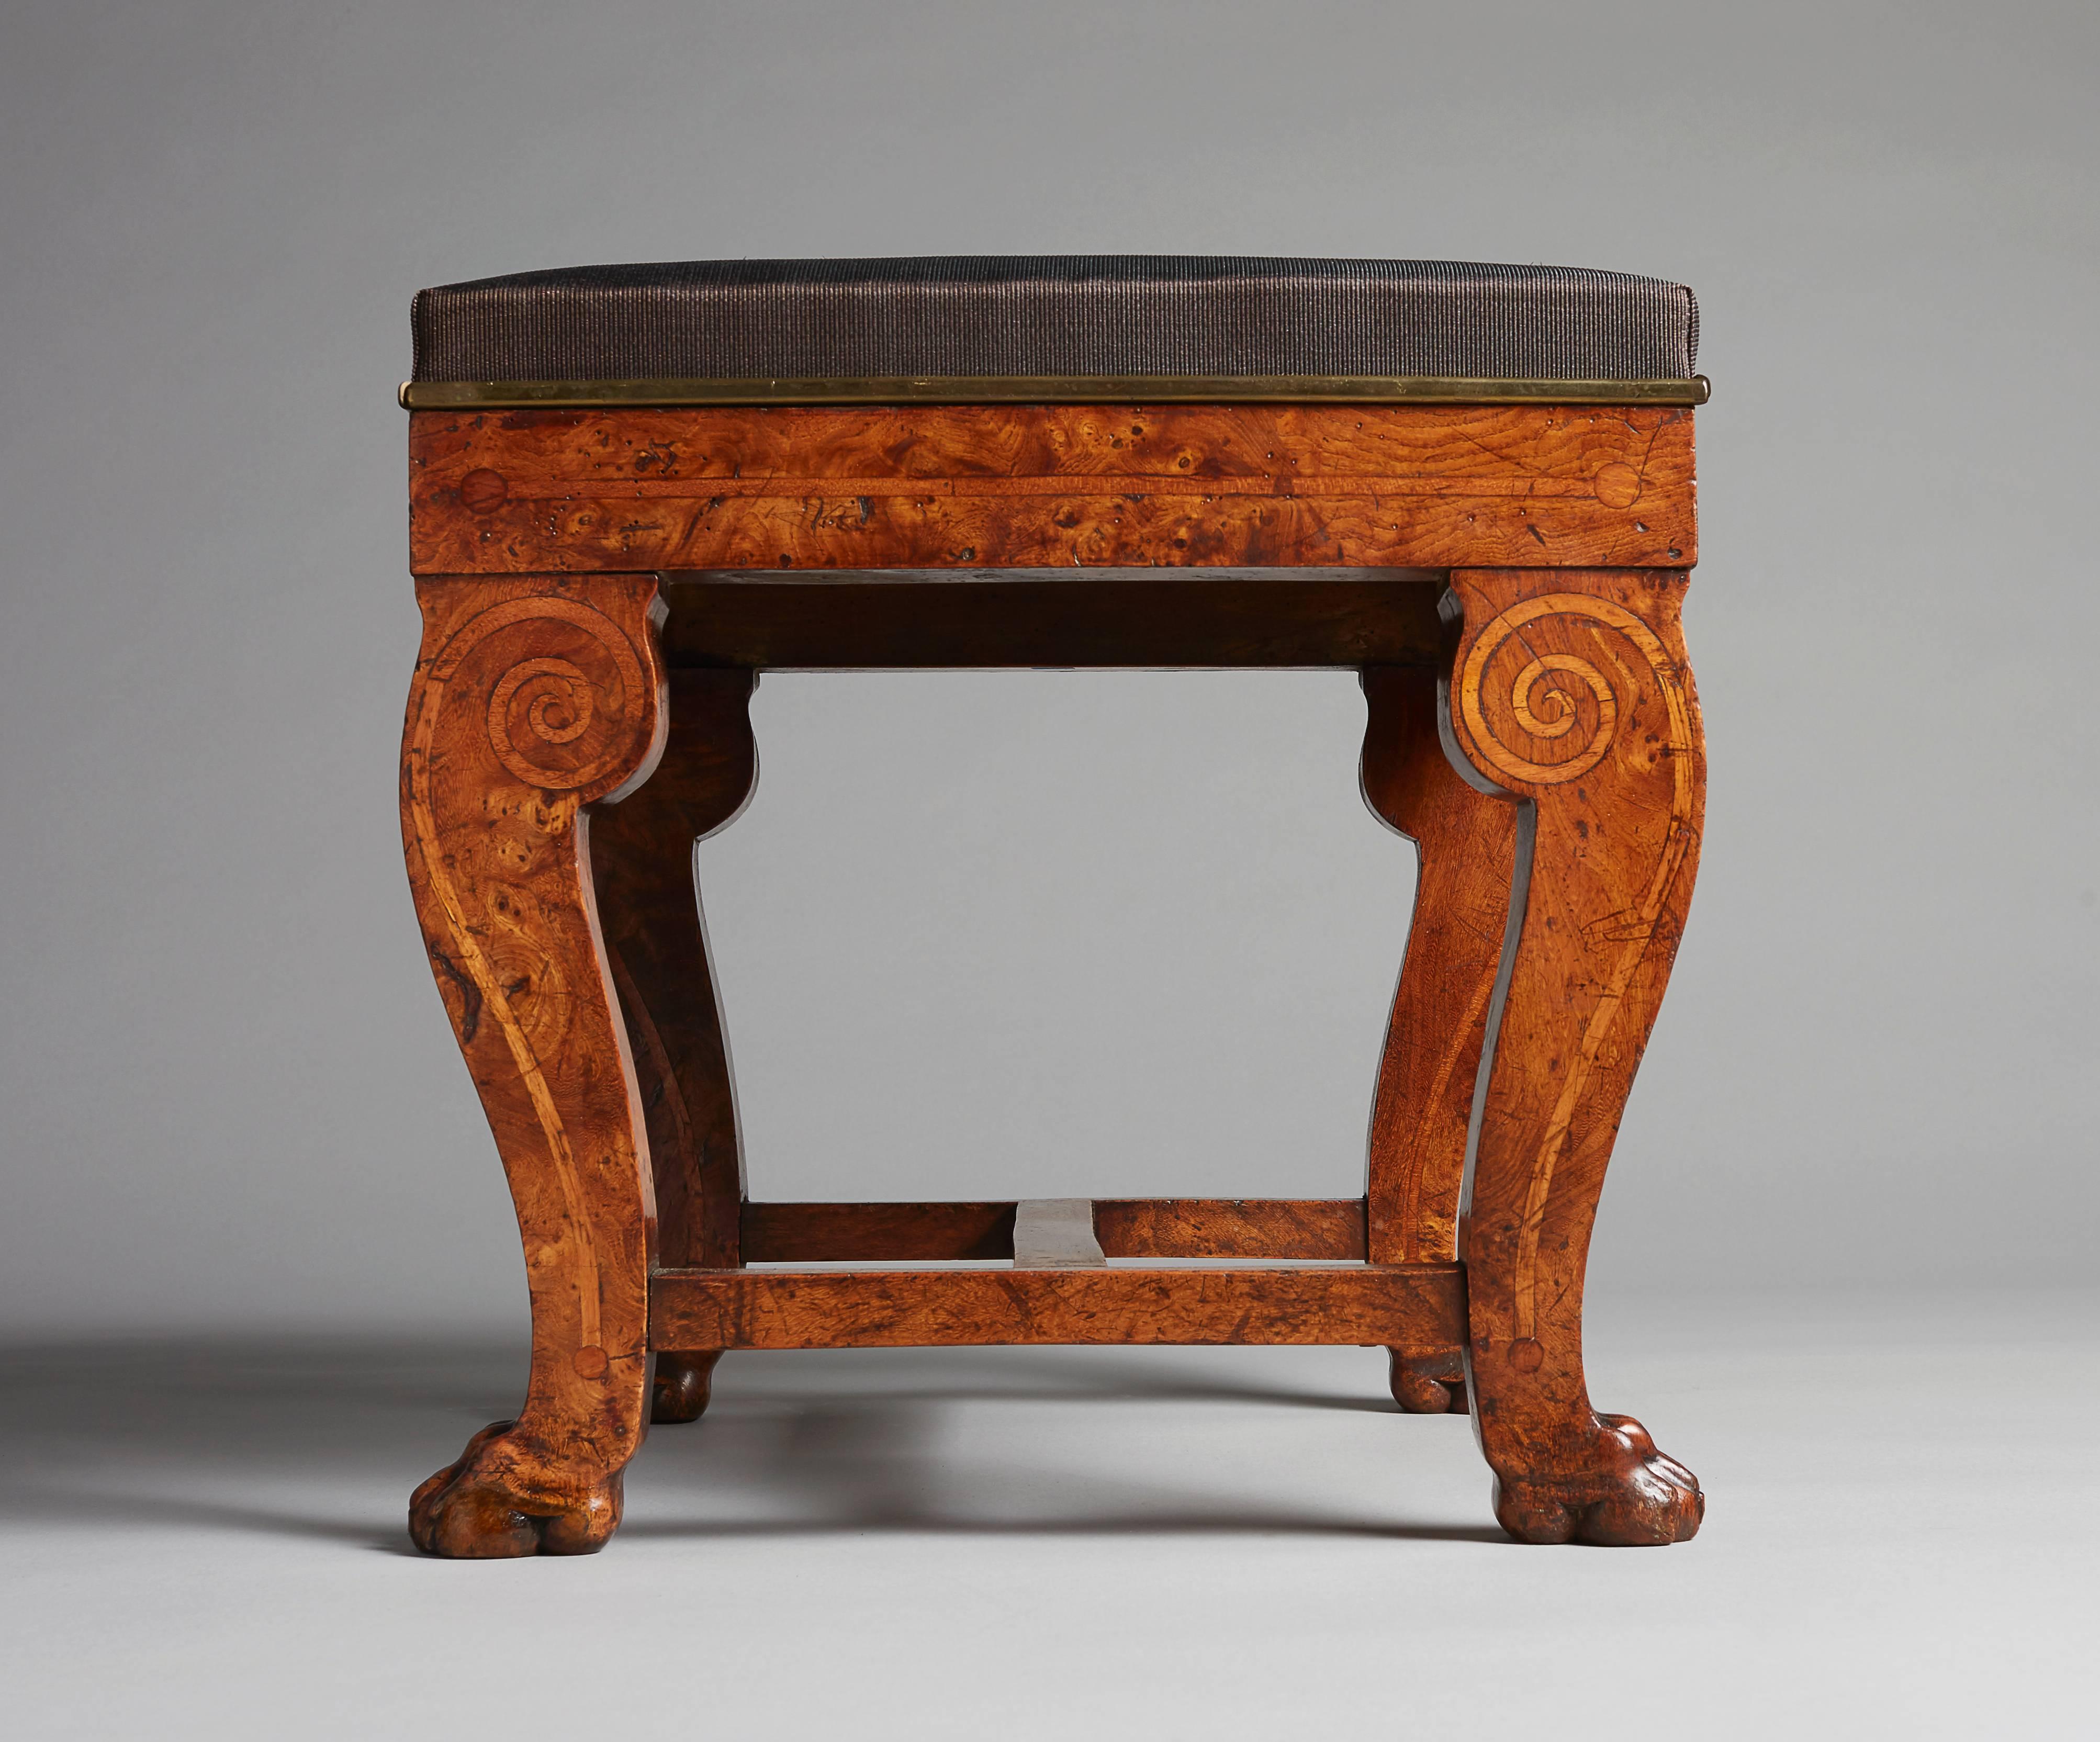 Elm Pair of Early 19th Century French Empire Tabouret Stools by Jacob-Desmalter